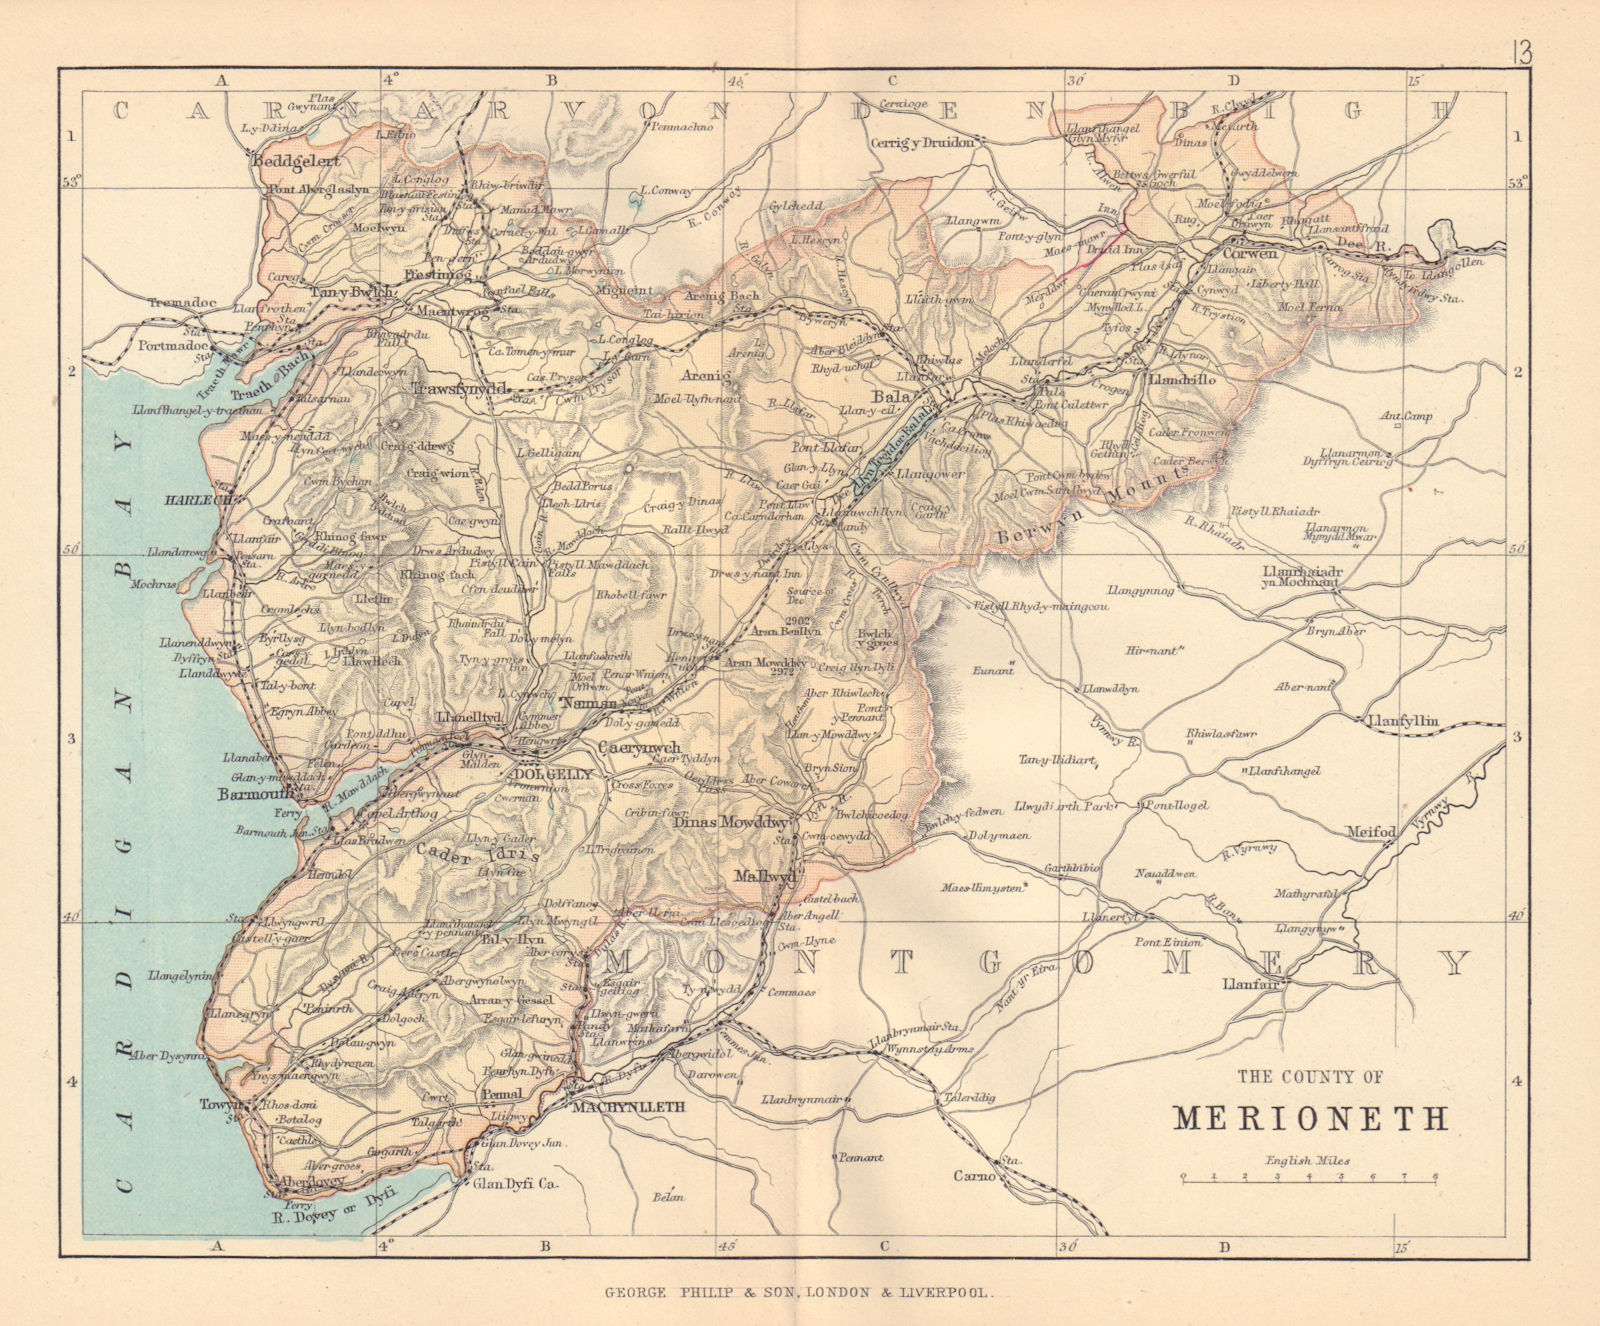 Associate Product MERIONETHSHIRE "County of Merioneth" Barmouth Tywyn Wales BARTHOLOMEW 1885 map